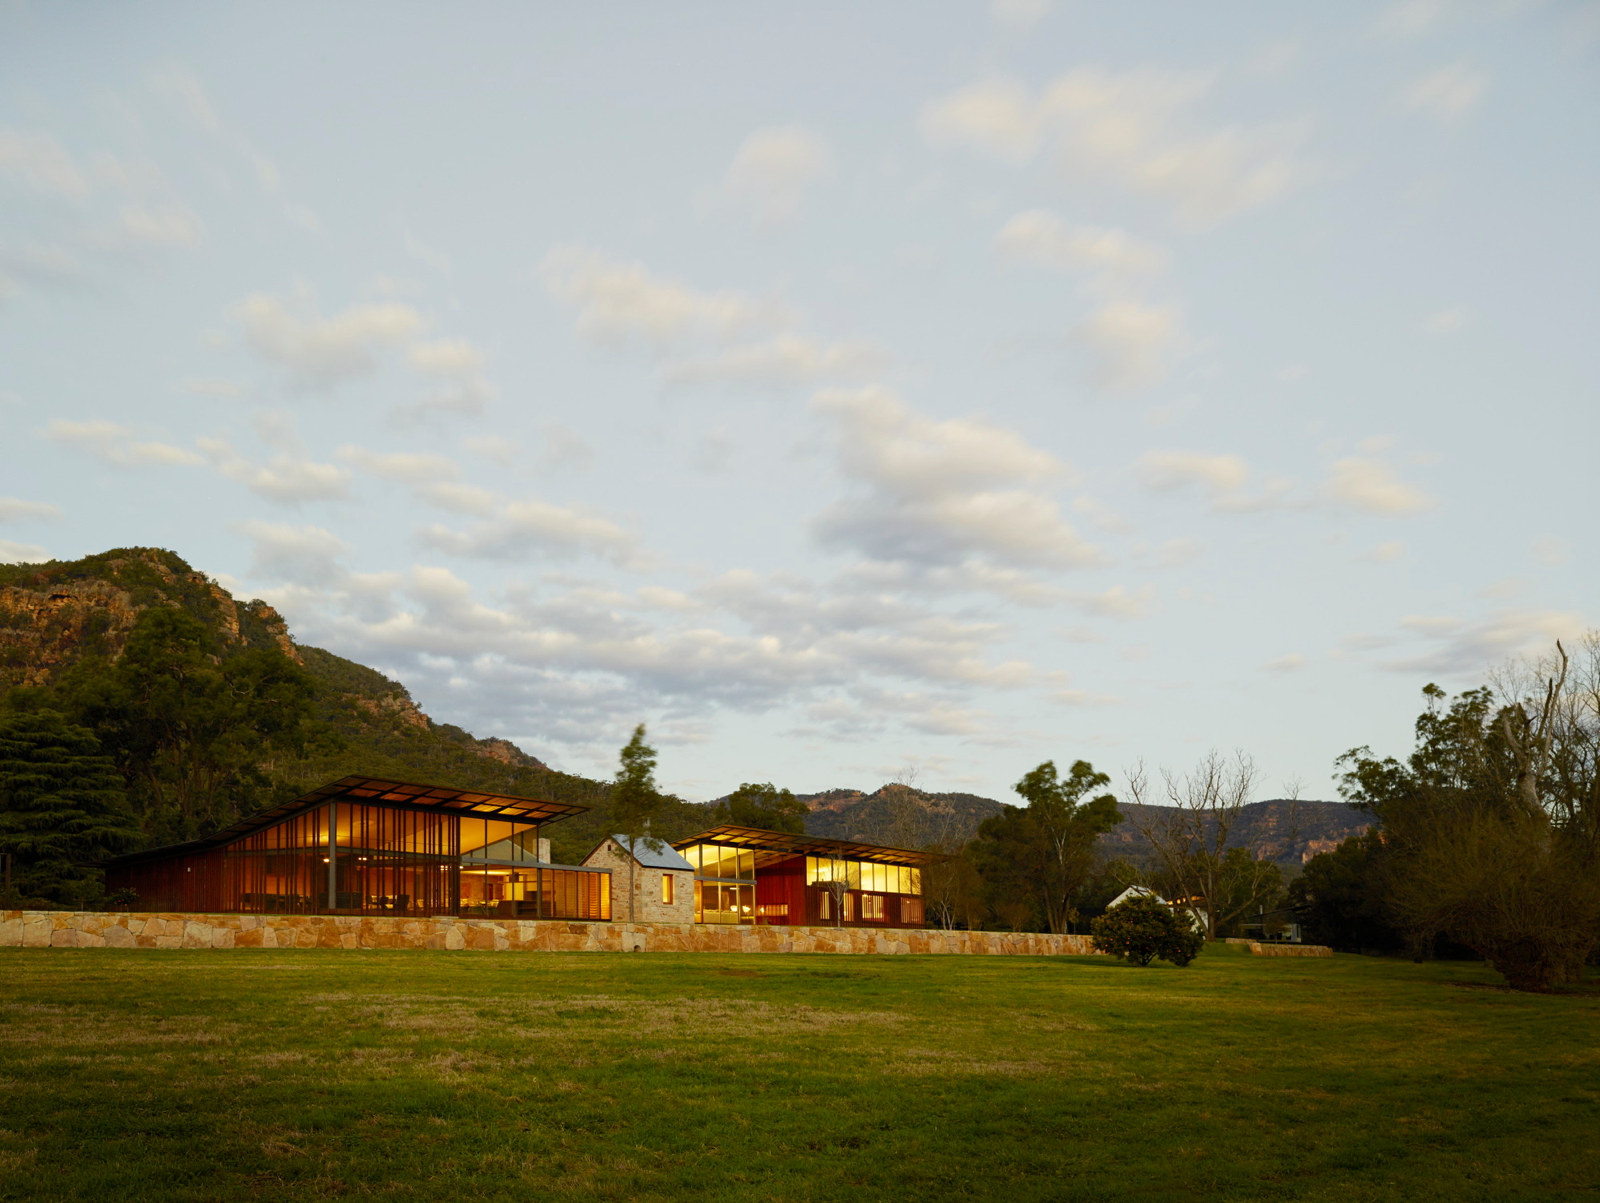 Landscape view of country house in New South Wales